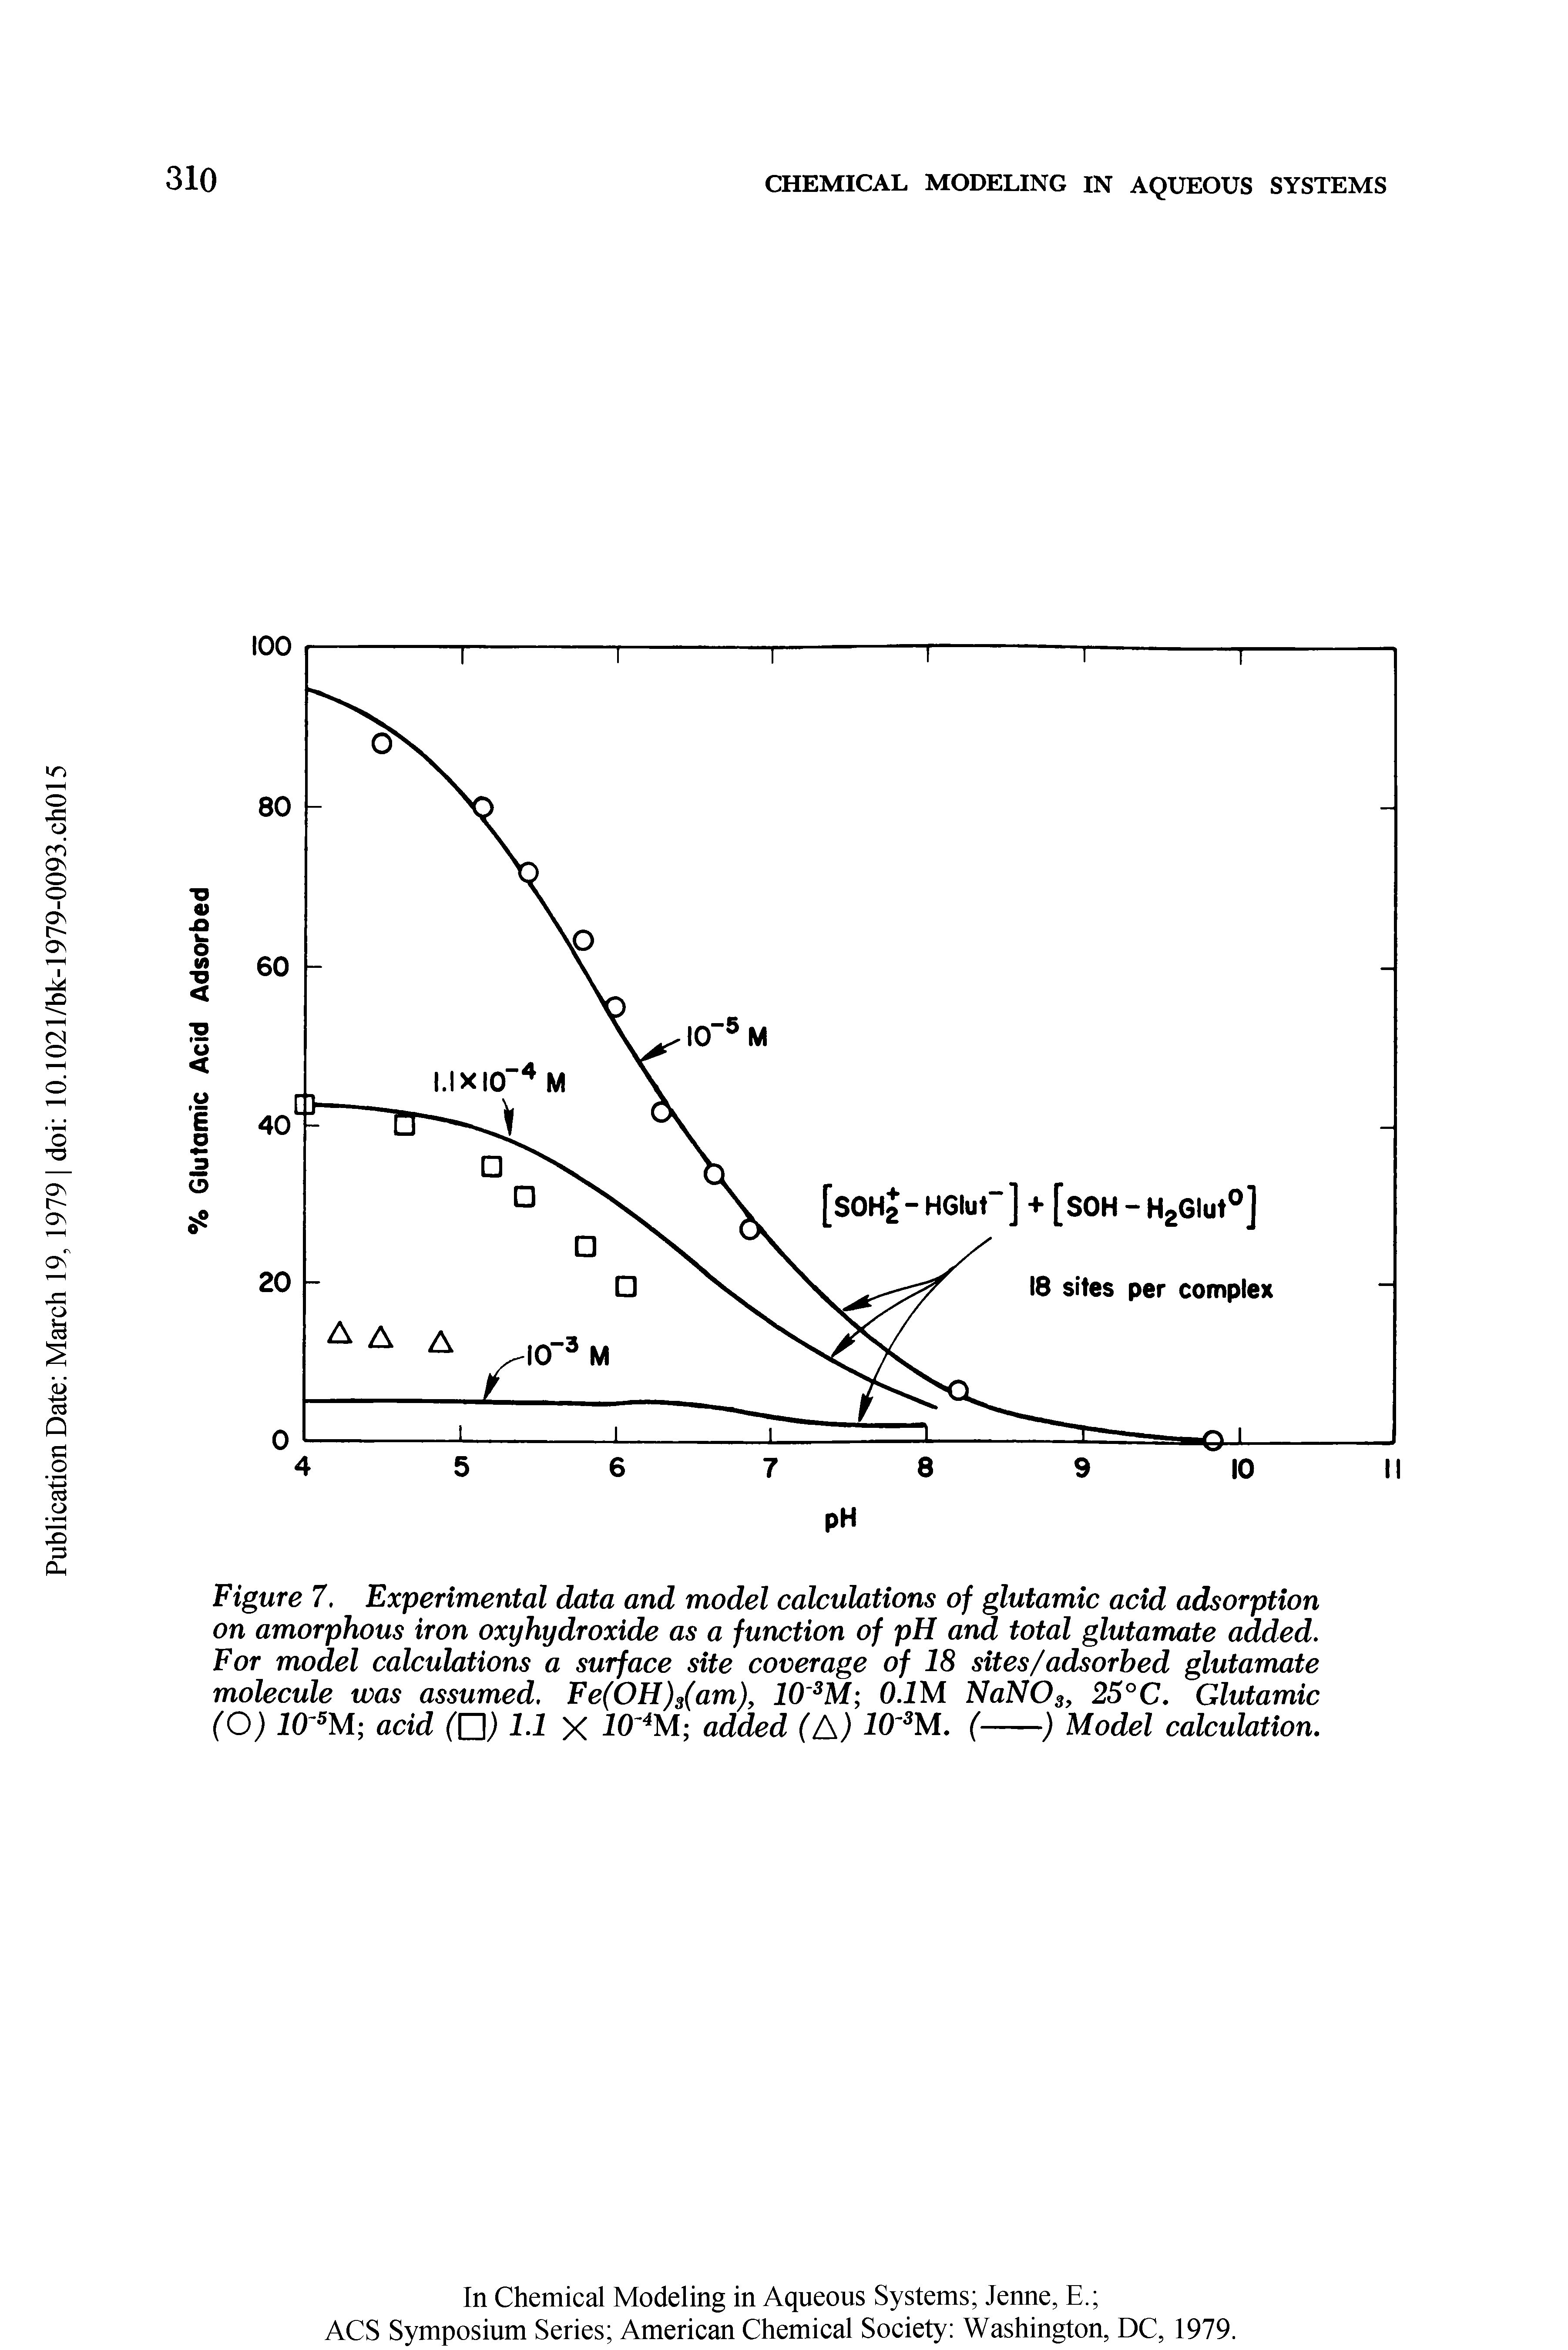 Figure 7. Experimental data and model calculations of glutamic acid adsorption on amorphous iron oxyhydroxide as a function of pH and total glutamate added. For model calculations a surface site coverage of 18 sites/adsorbed glutamate molecule was assumed, Fe(OH)s(am), lO M O.IM NaNOs, 25°C. Glutamic (O) acid 1.1 X added (A) (----) Model calculation.